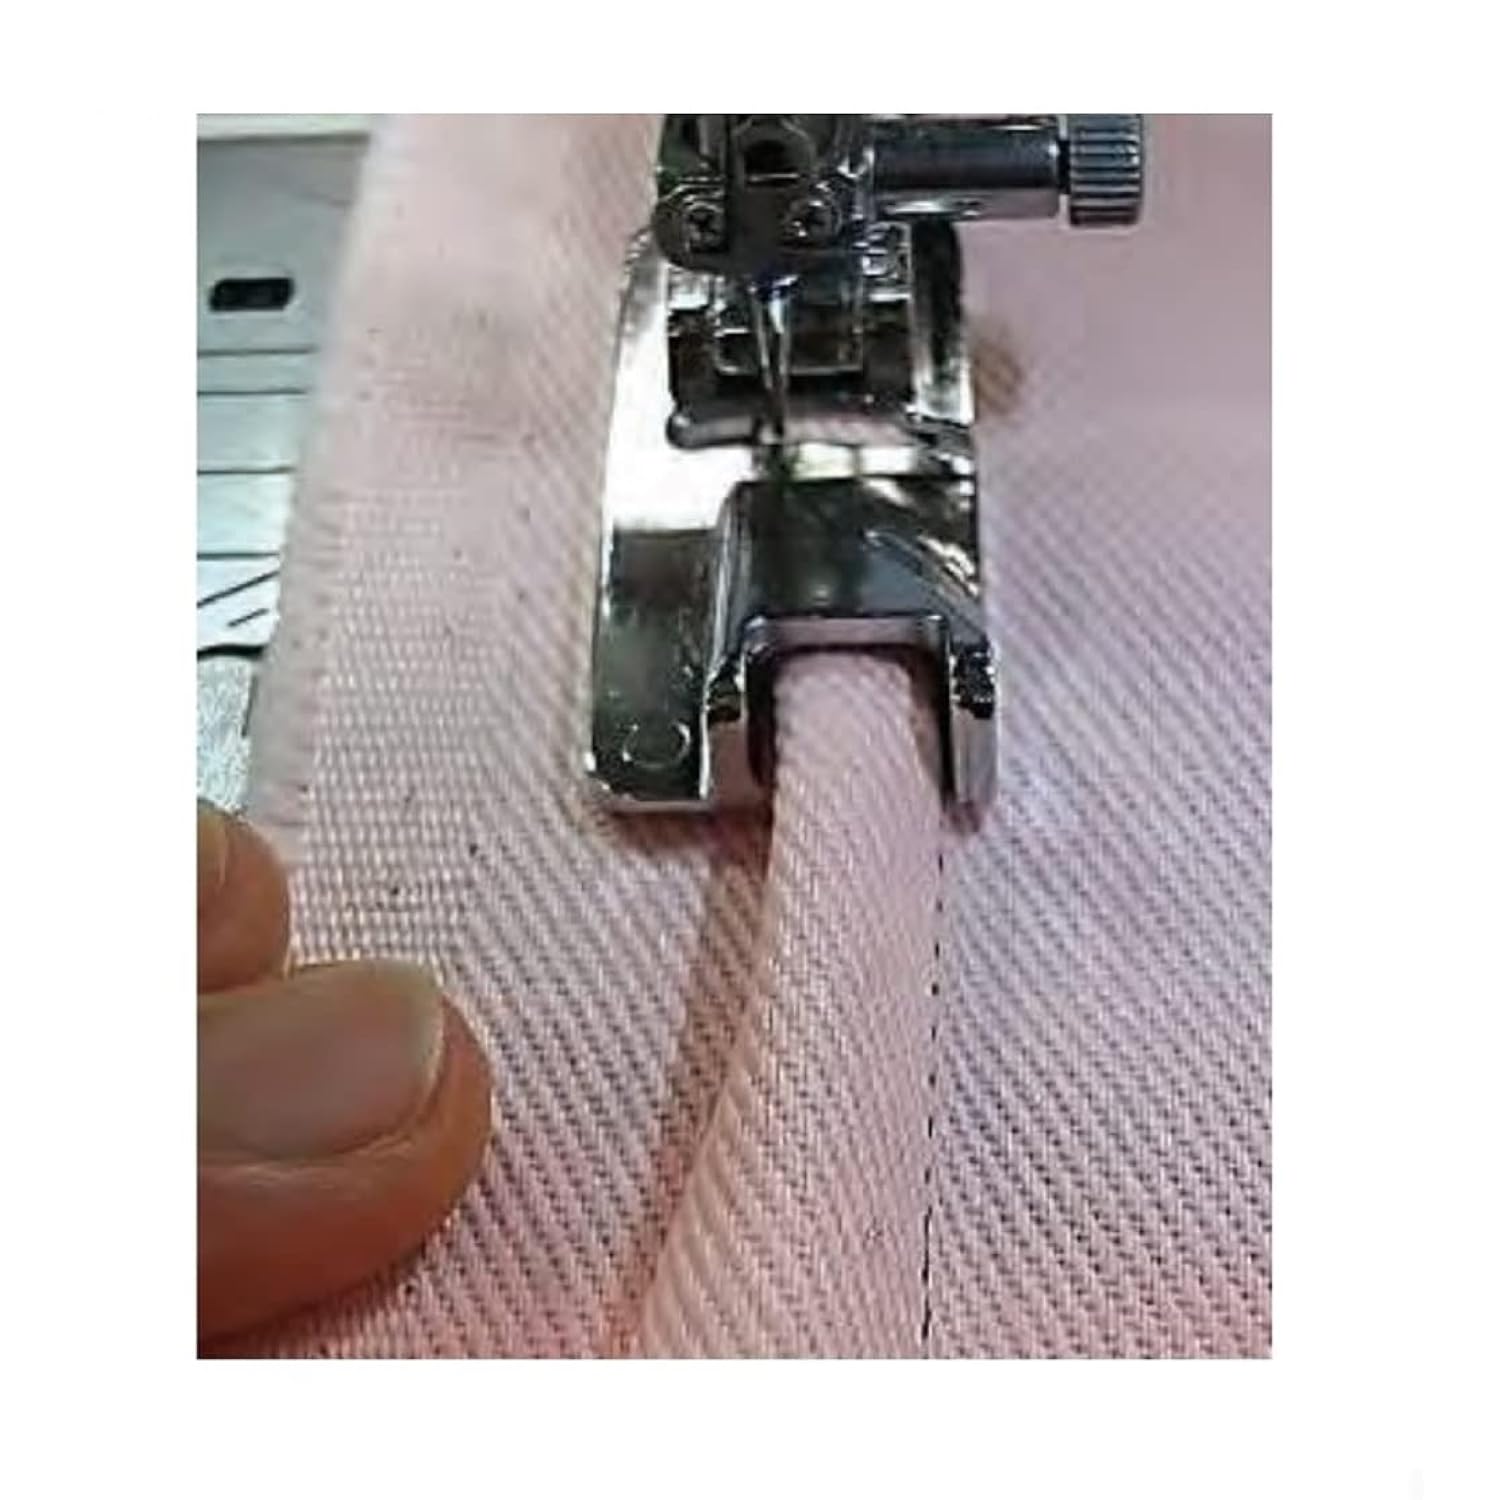 Janome Lap-Seam Foot for 9mm Machines